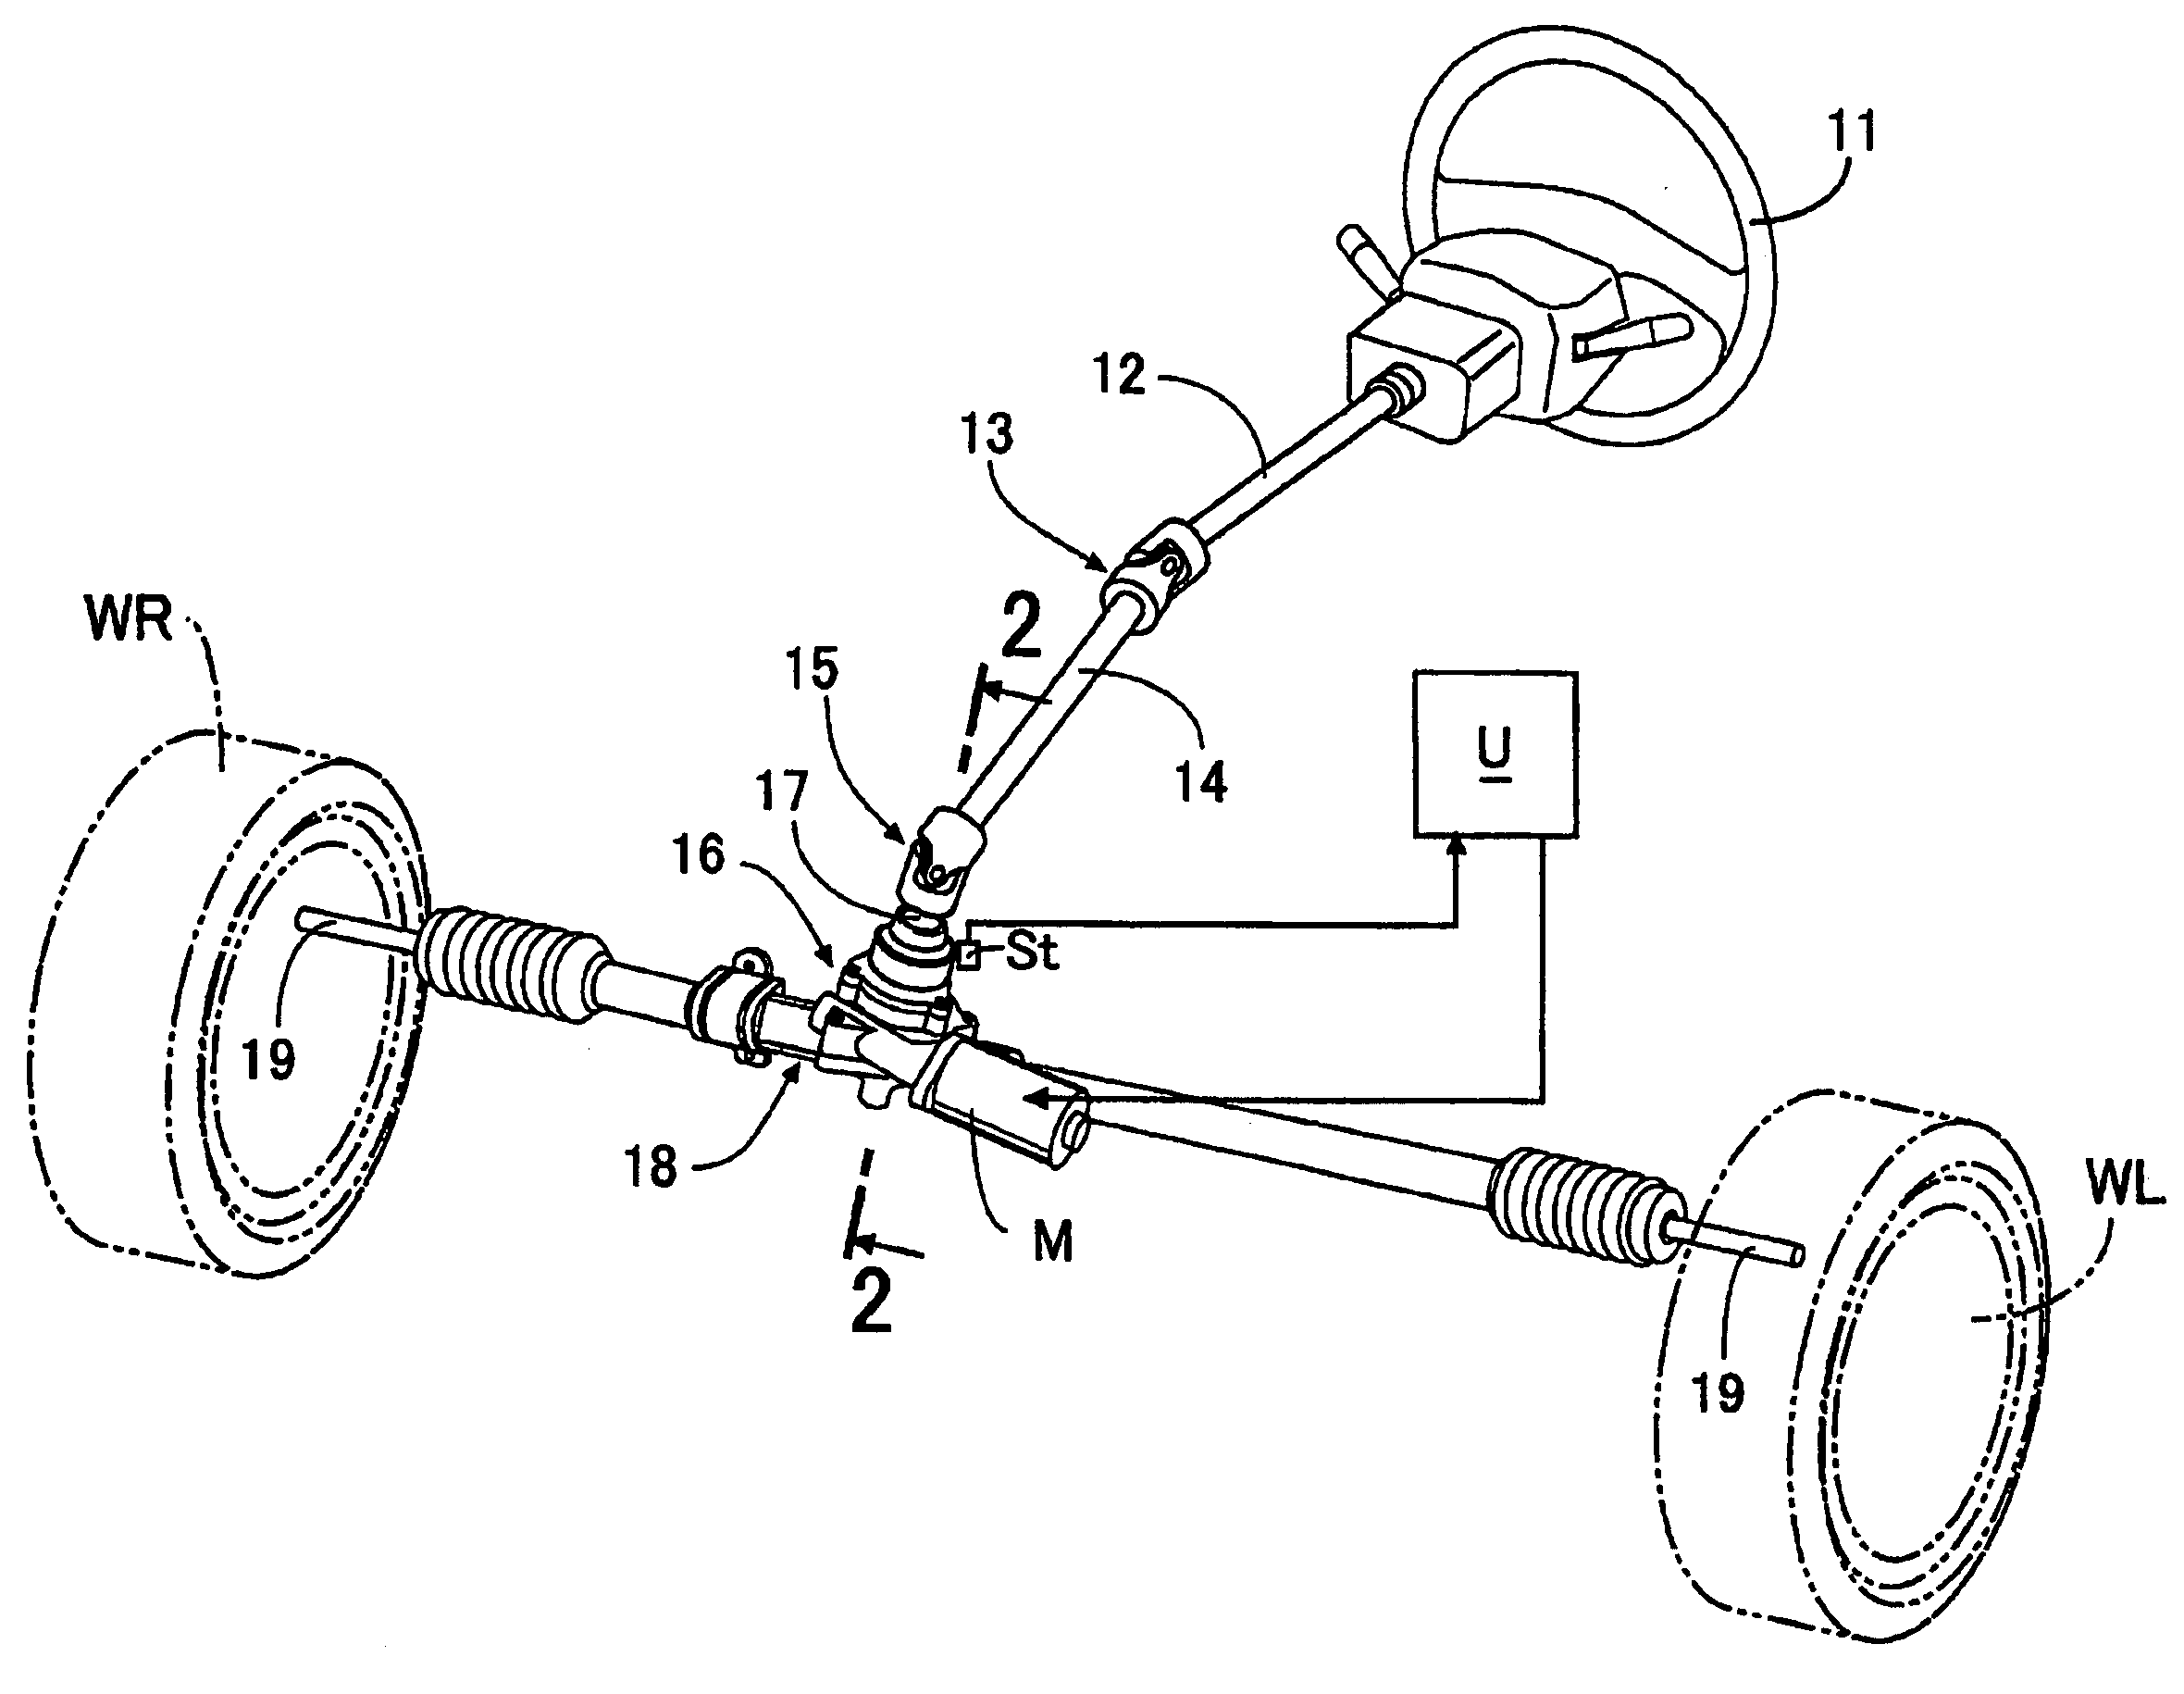 Magnetostrictive torque sensor device, manufacturing method thereof, and vehicle steering apparatus